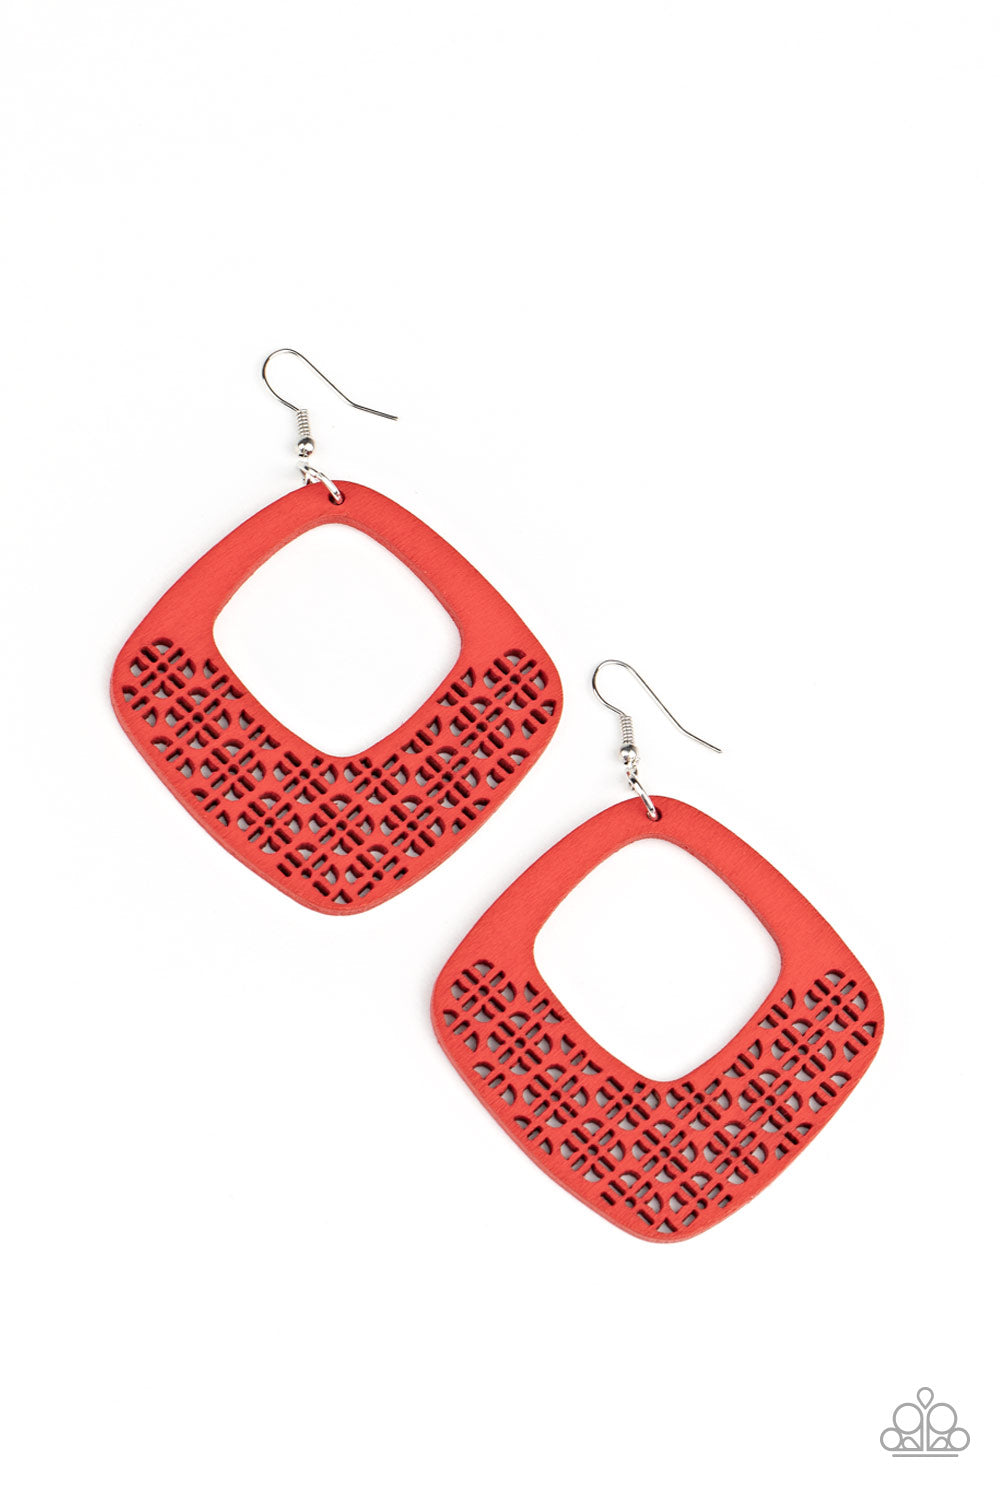 Paparazzi Accessories - WOOD You Rather - Red Earrings